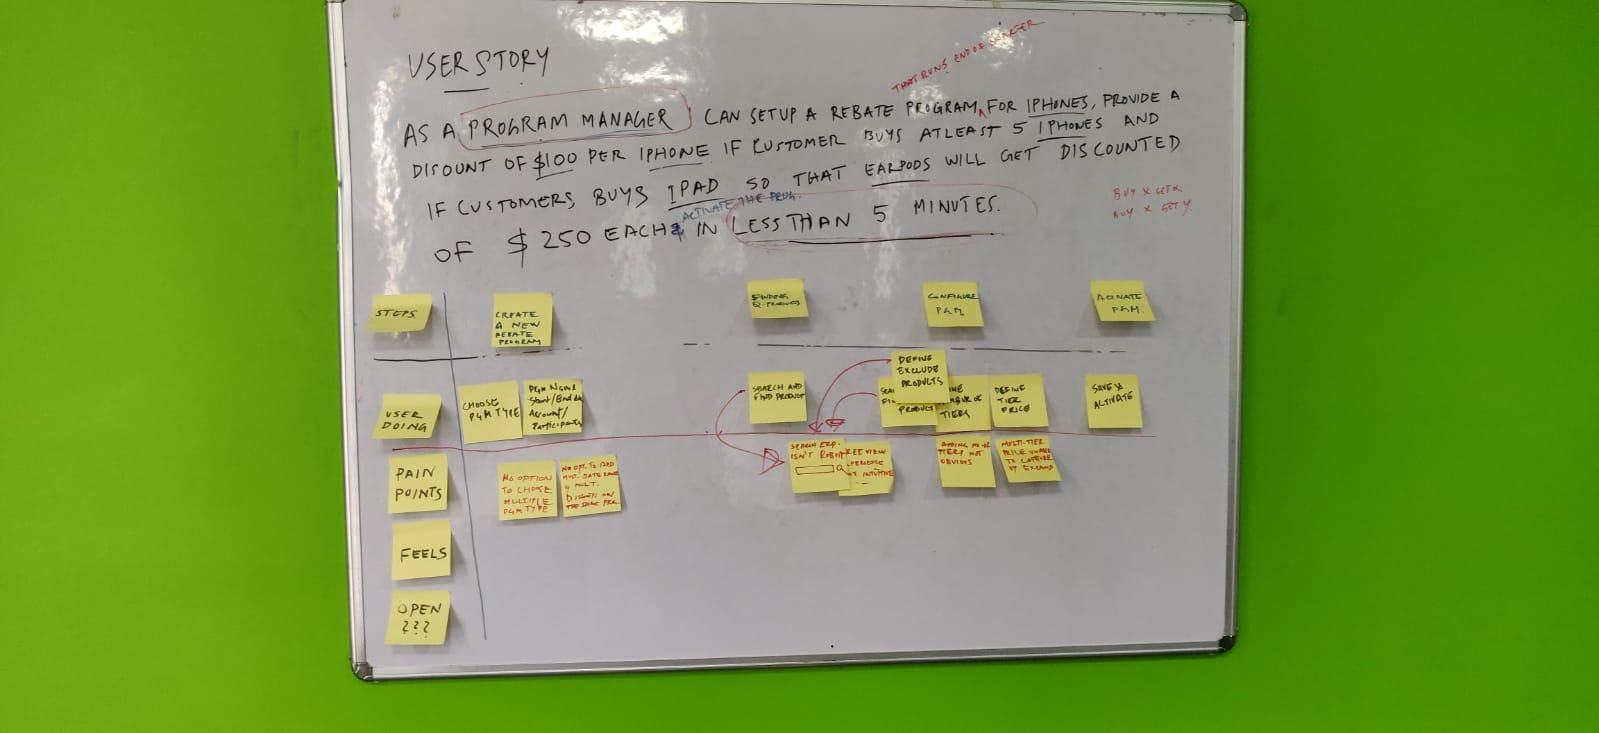 Apttus Rebates main user story and user experience map on a whiteboard.